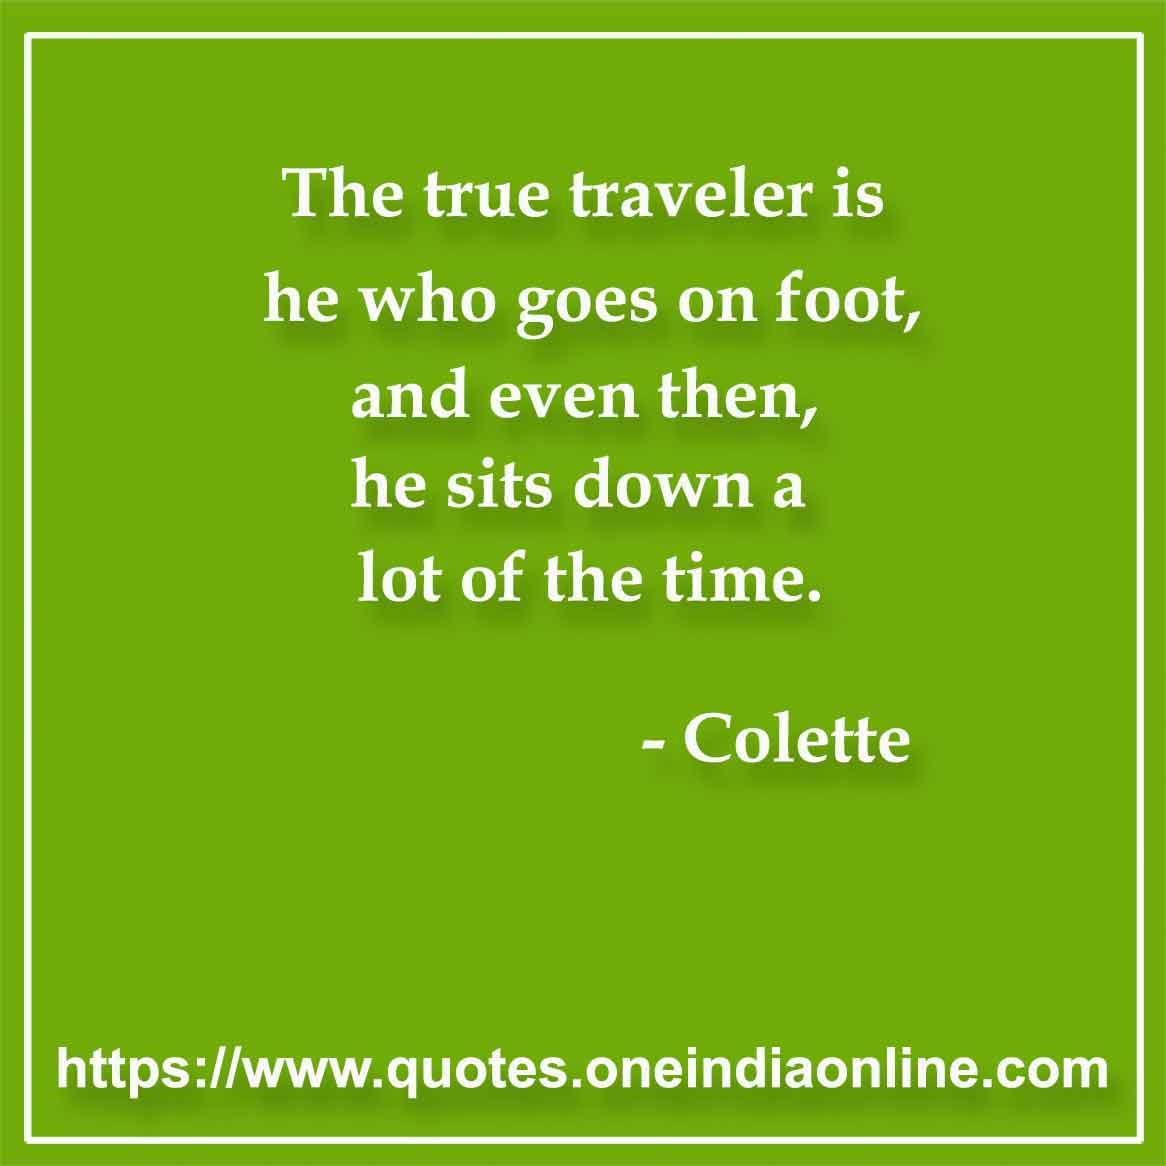 The true traveler is he who goes on foot, and even then, he sits down a lot of the time.

-  by Colette